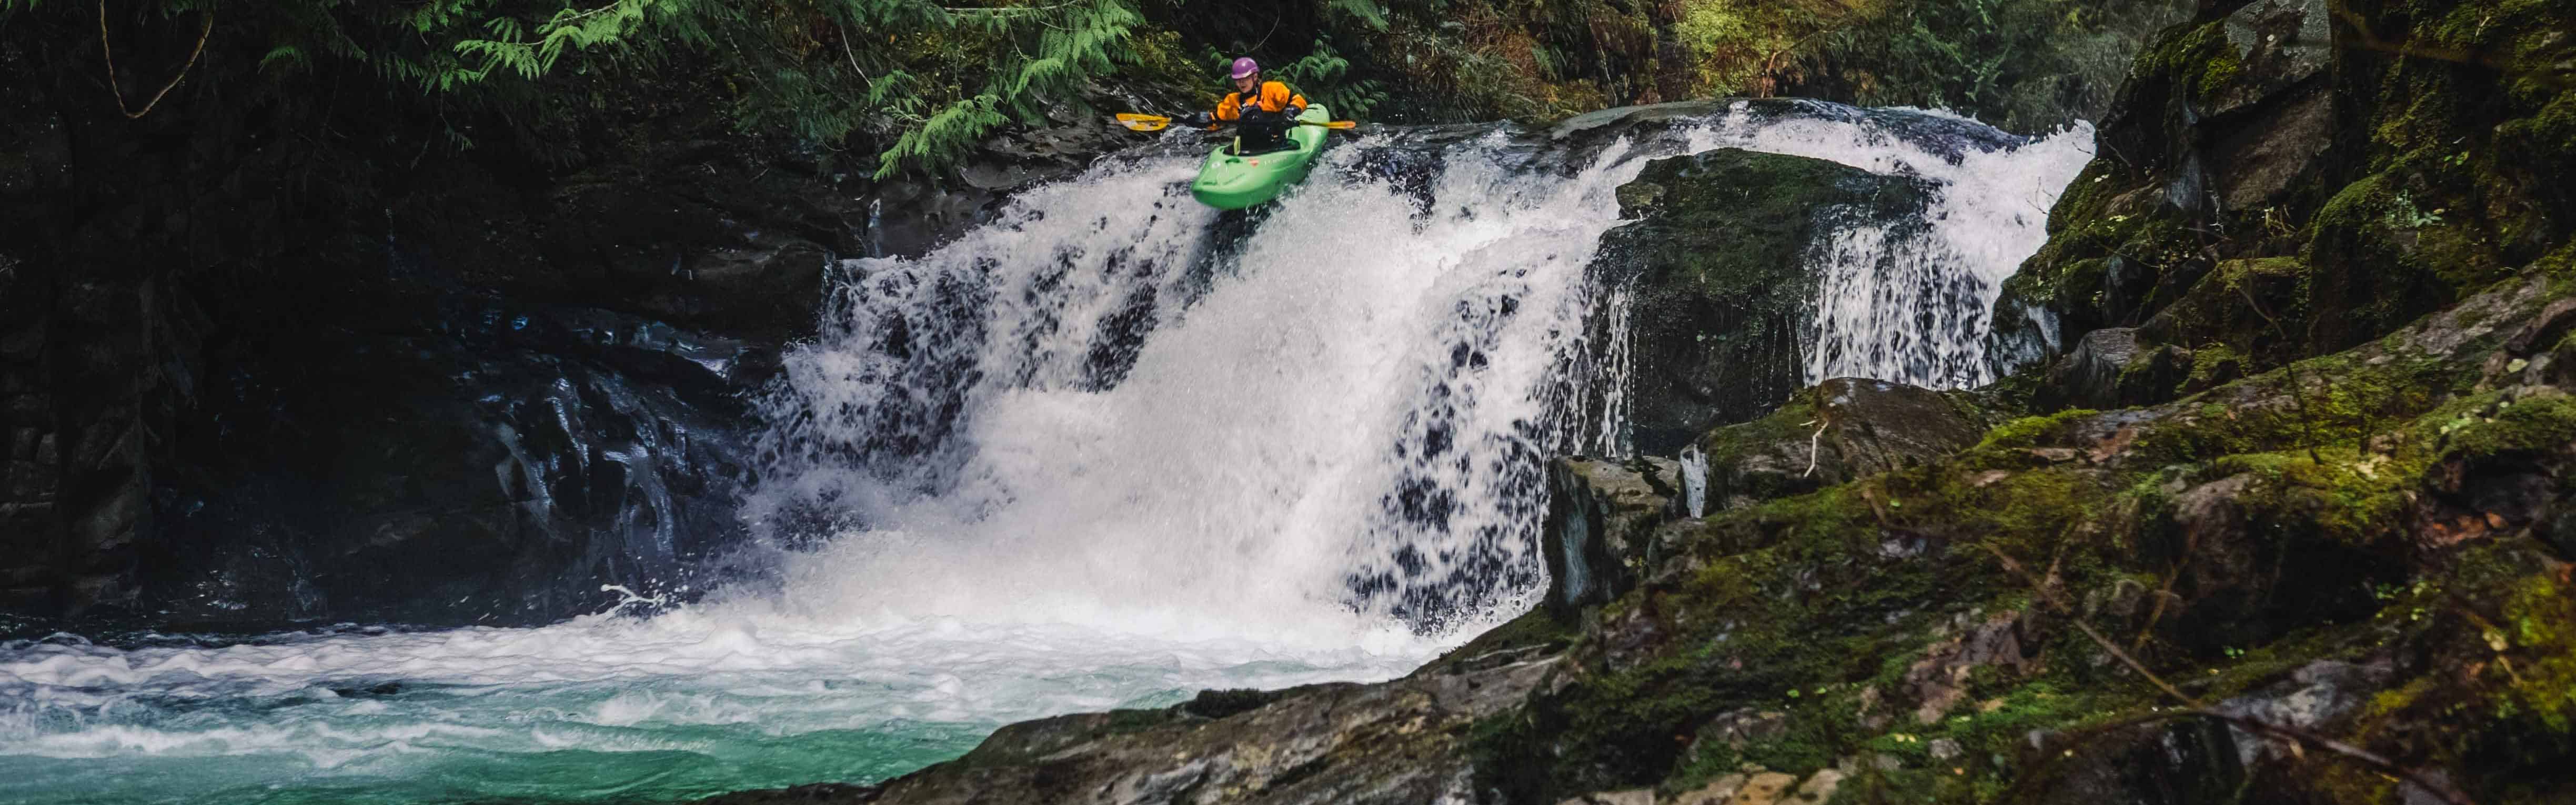 A paddler drops over one of the Sitkum’s clean waterfalls. Photo by Nate Wilson Photography